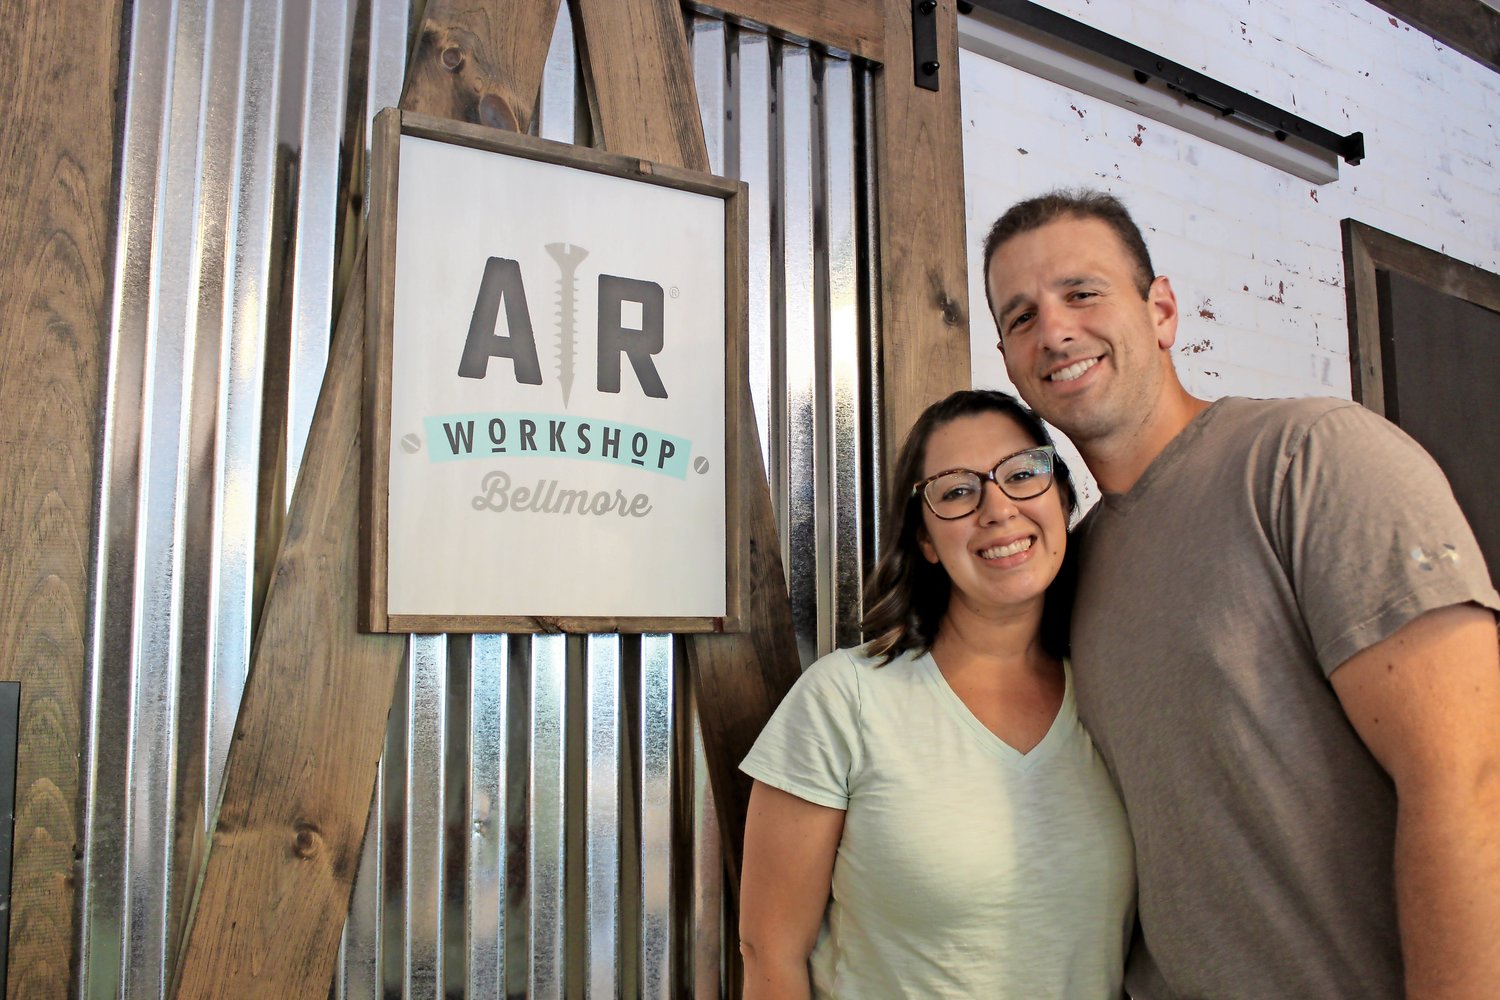 Bellmore residents Julie and Michael Alveari opened AR Workshop’s Bellmore location earlier this year, giving the community a place to create and collaborate over DIY activities.